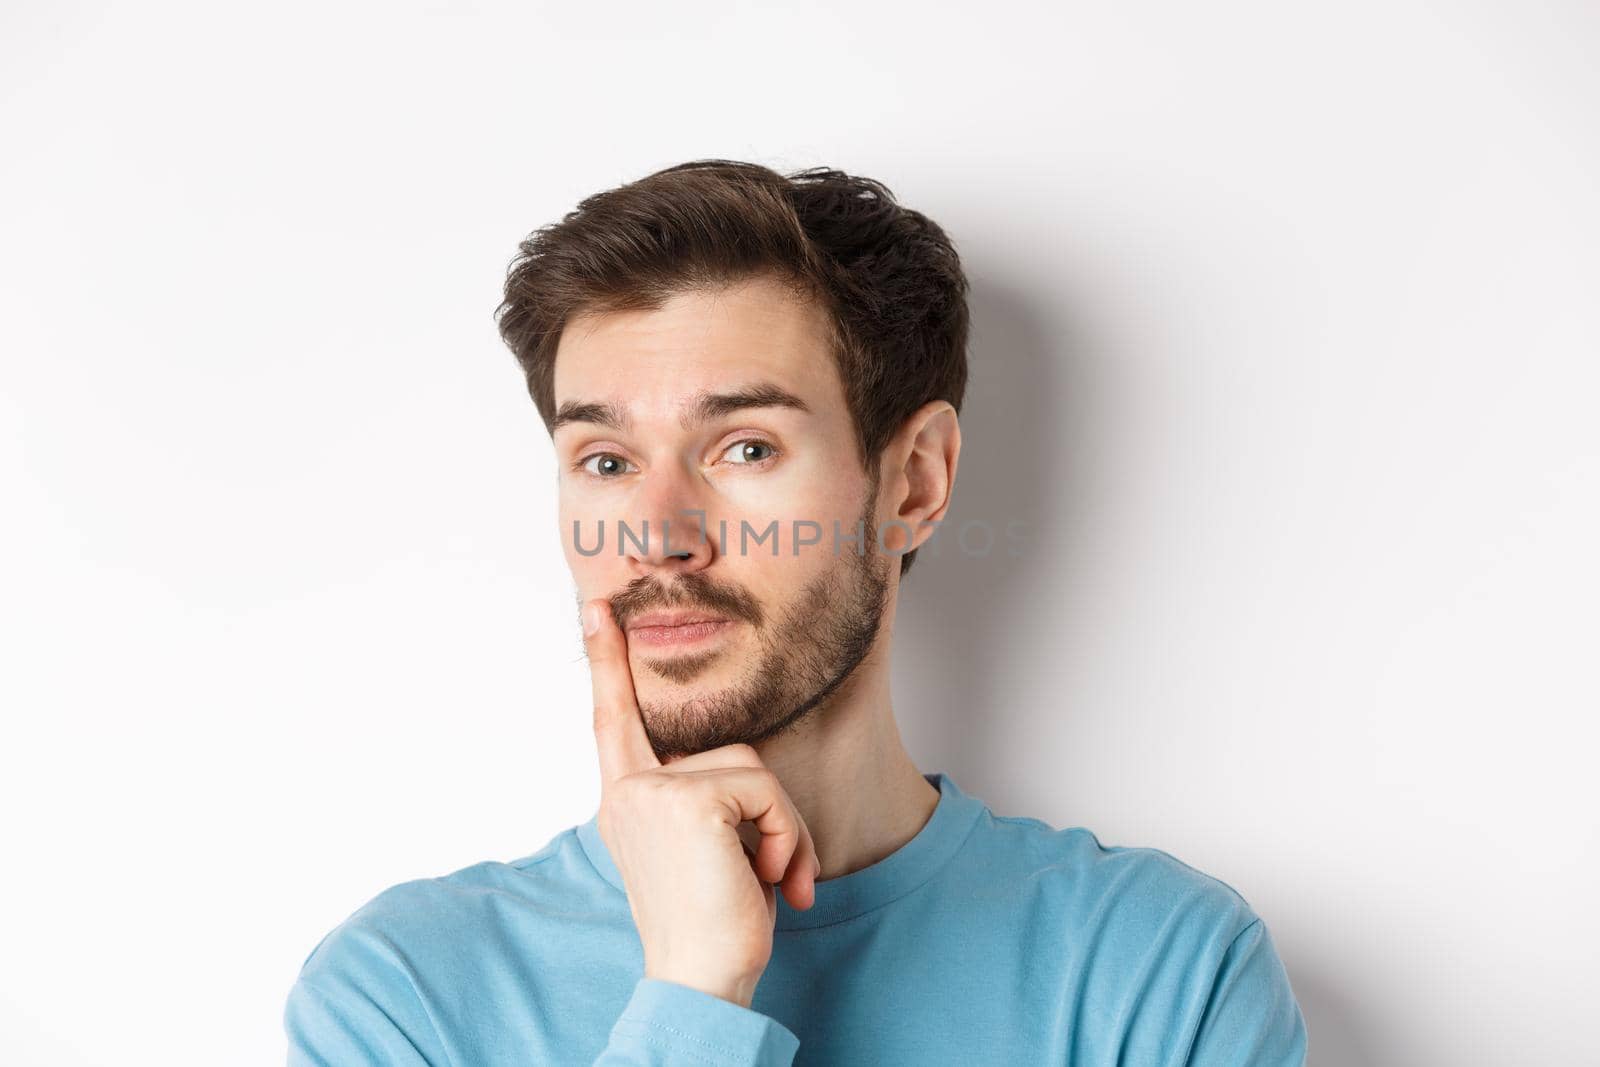 Image of thoughtful young man with beard, making choice, touching lip and looking pensive at camera, deciding something, white background.